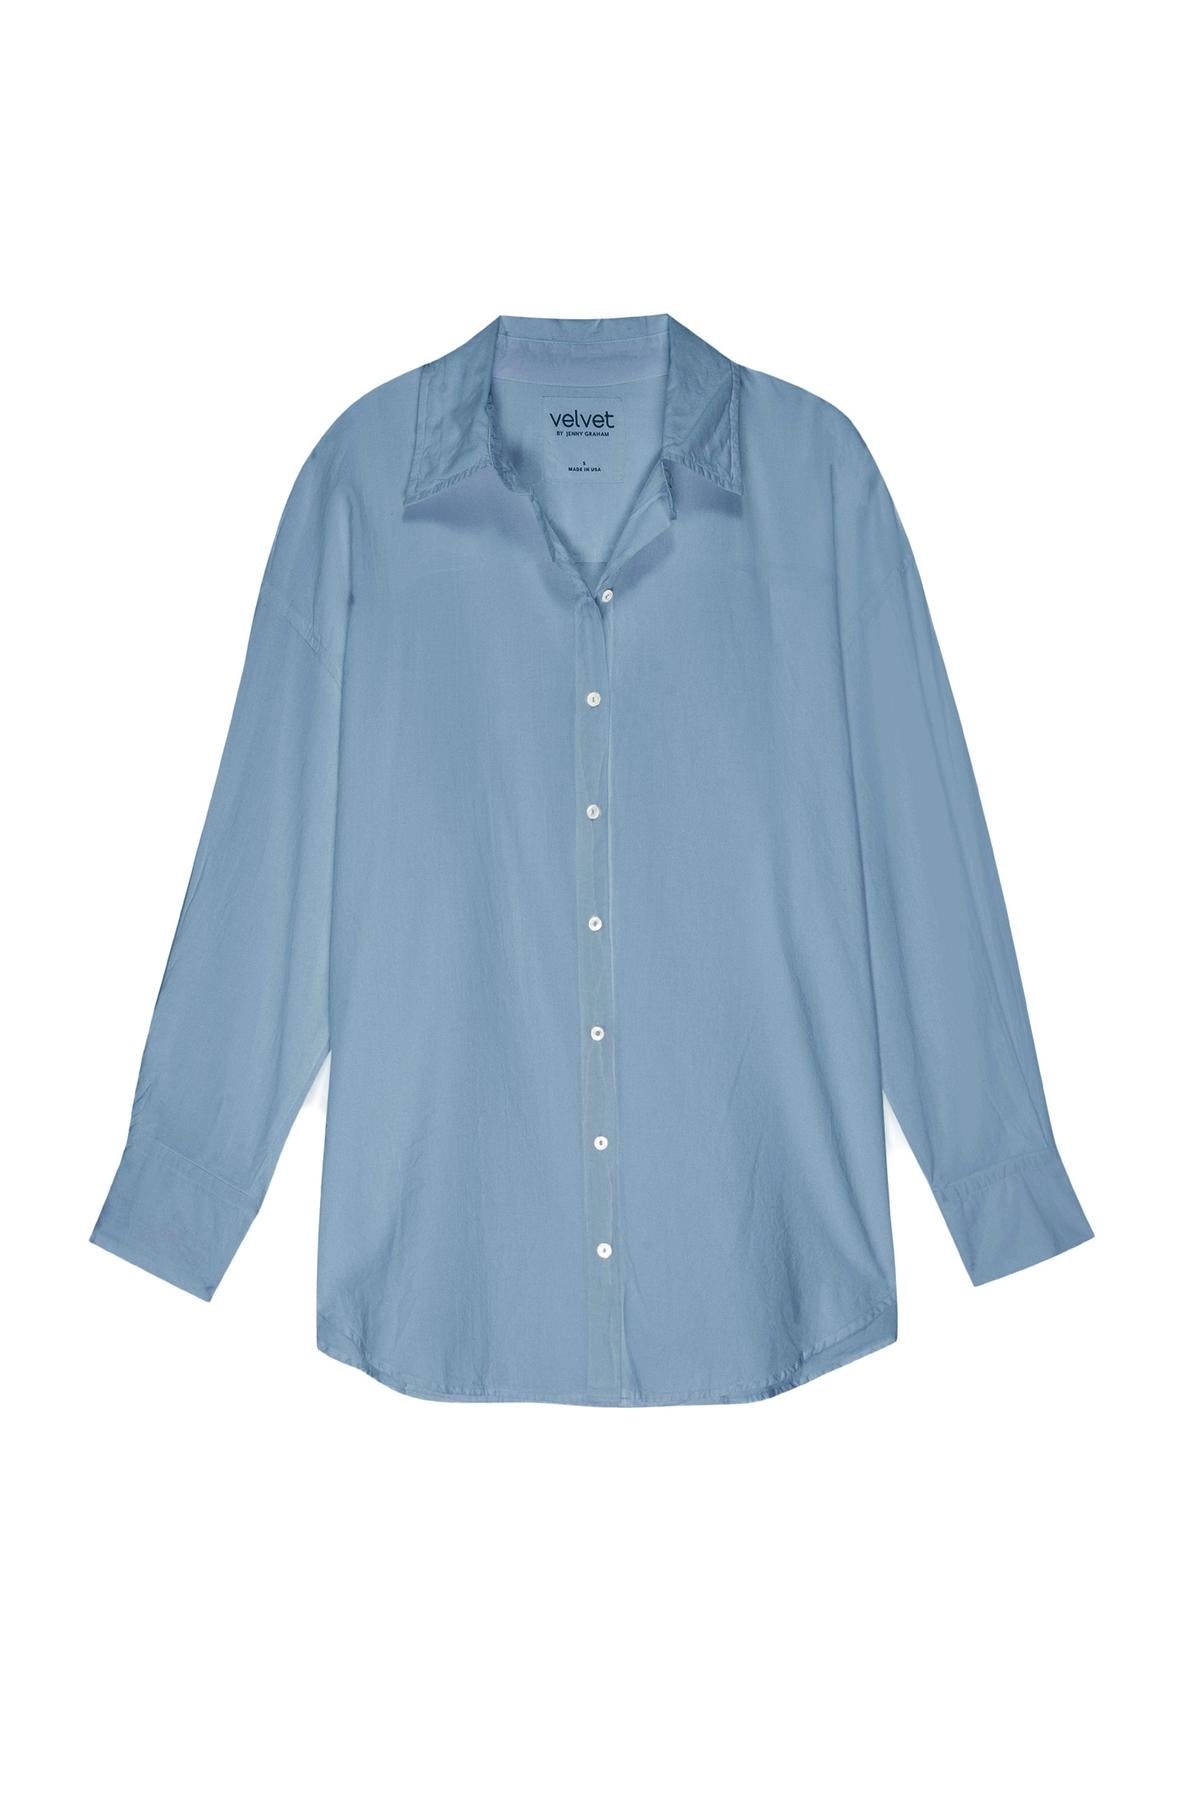 An oversized women's blue cotton REDONDO BUTTON-UP SHIRT with drop shoulder style by Velvet by Jenny Graham.-36212517077185